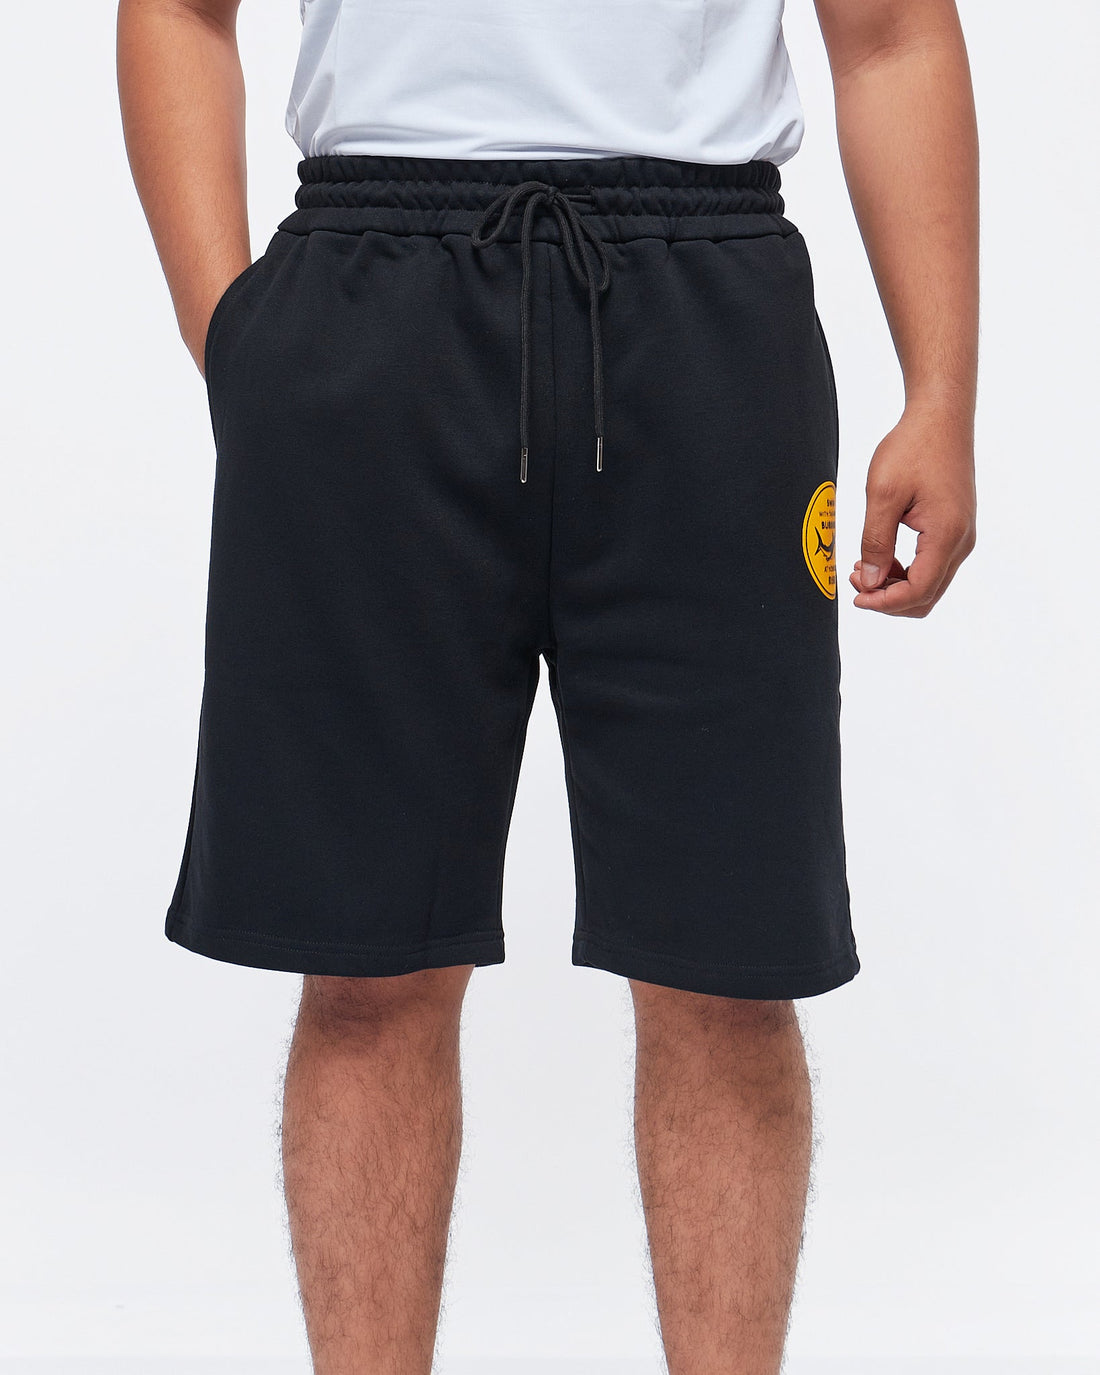 MOI OUTFIT-Yellow Fish Embroidered Men Shorts 18.90